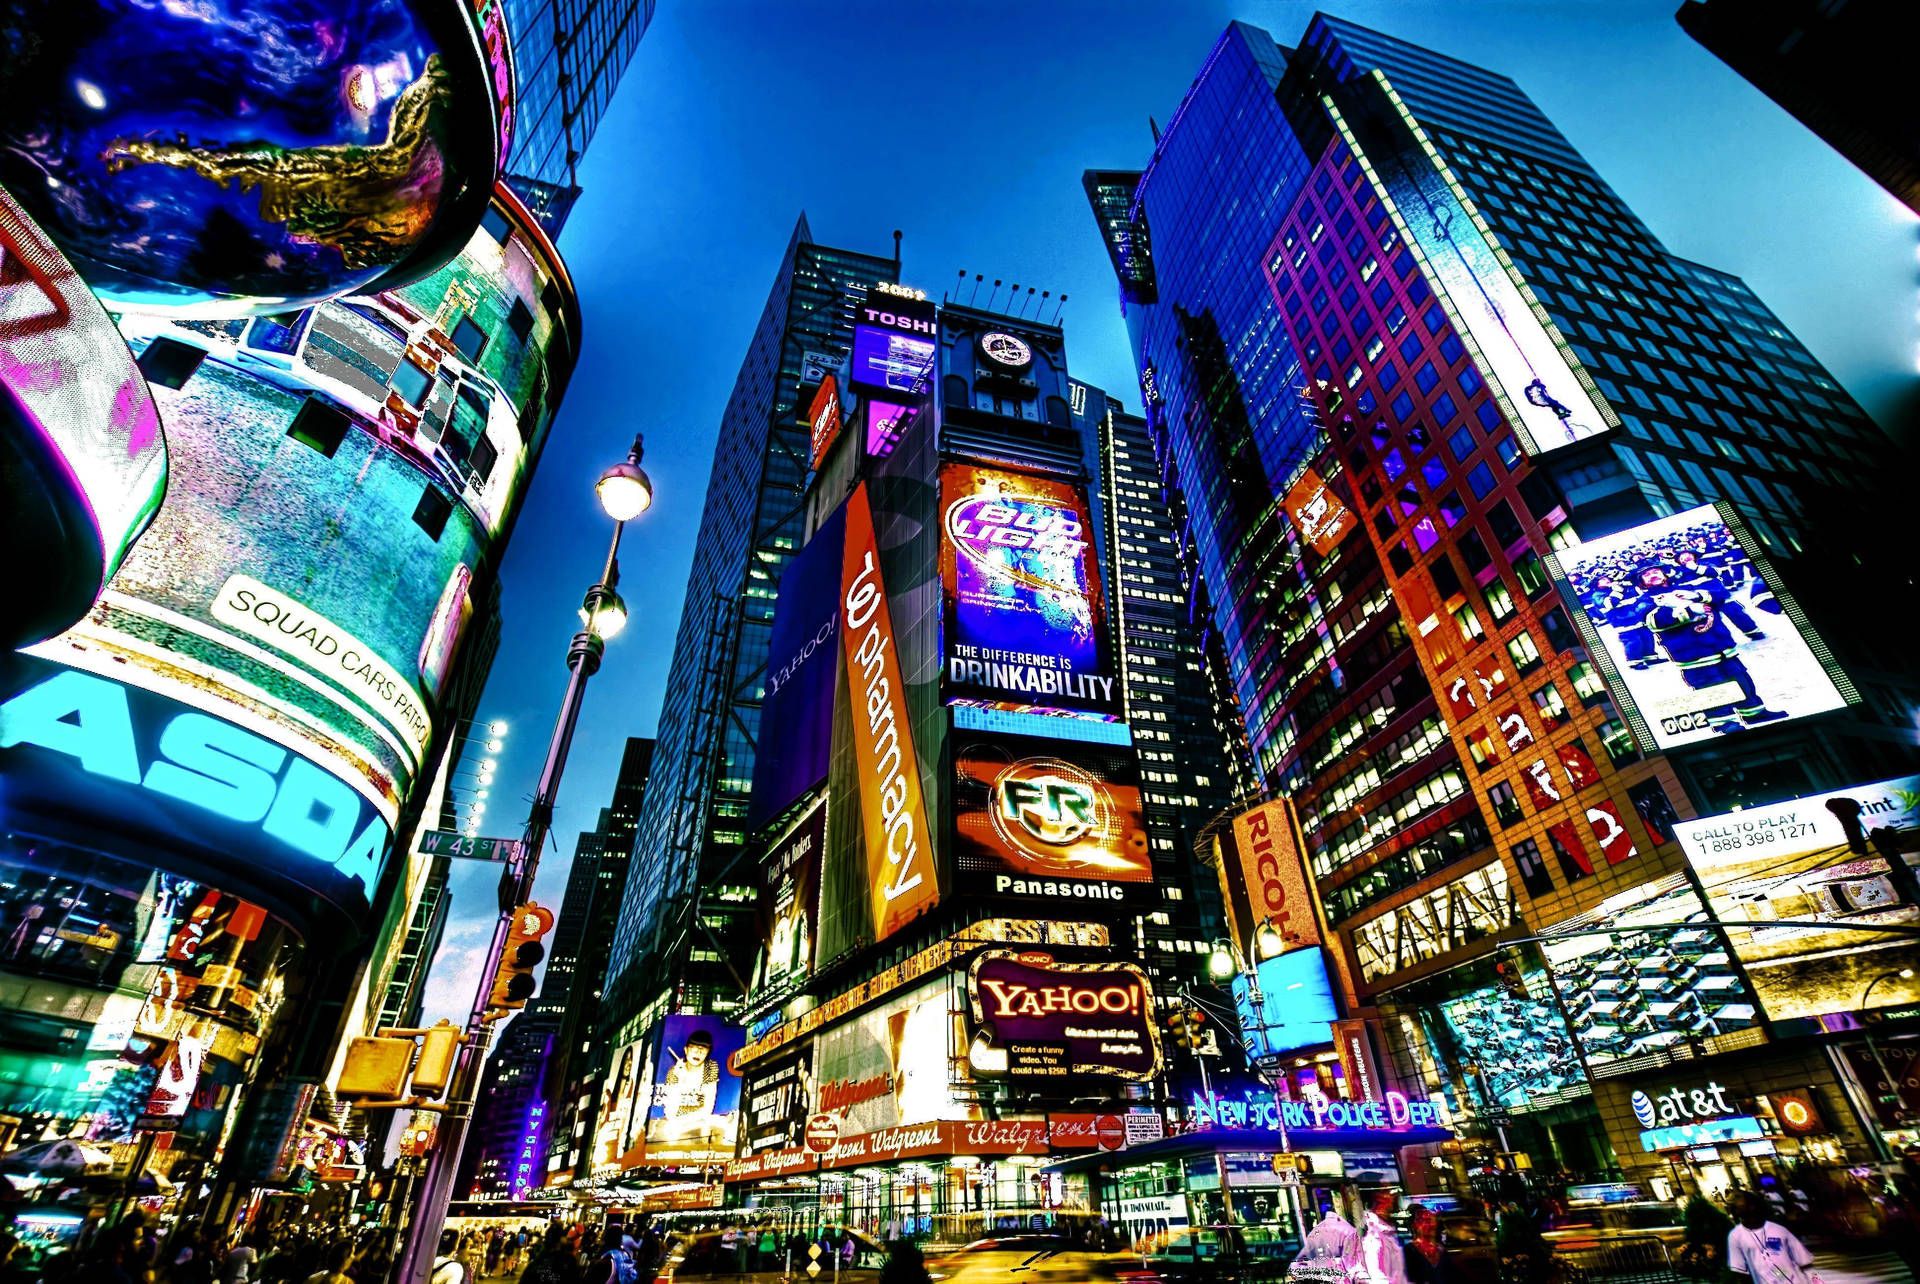 Times Square is a major commercial and cultural area in the heart of Manhattan, New York City. - Broadway